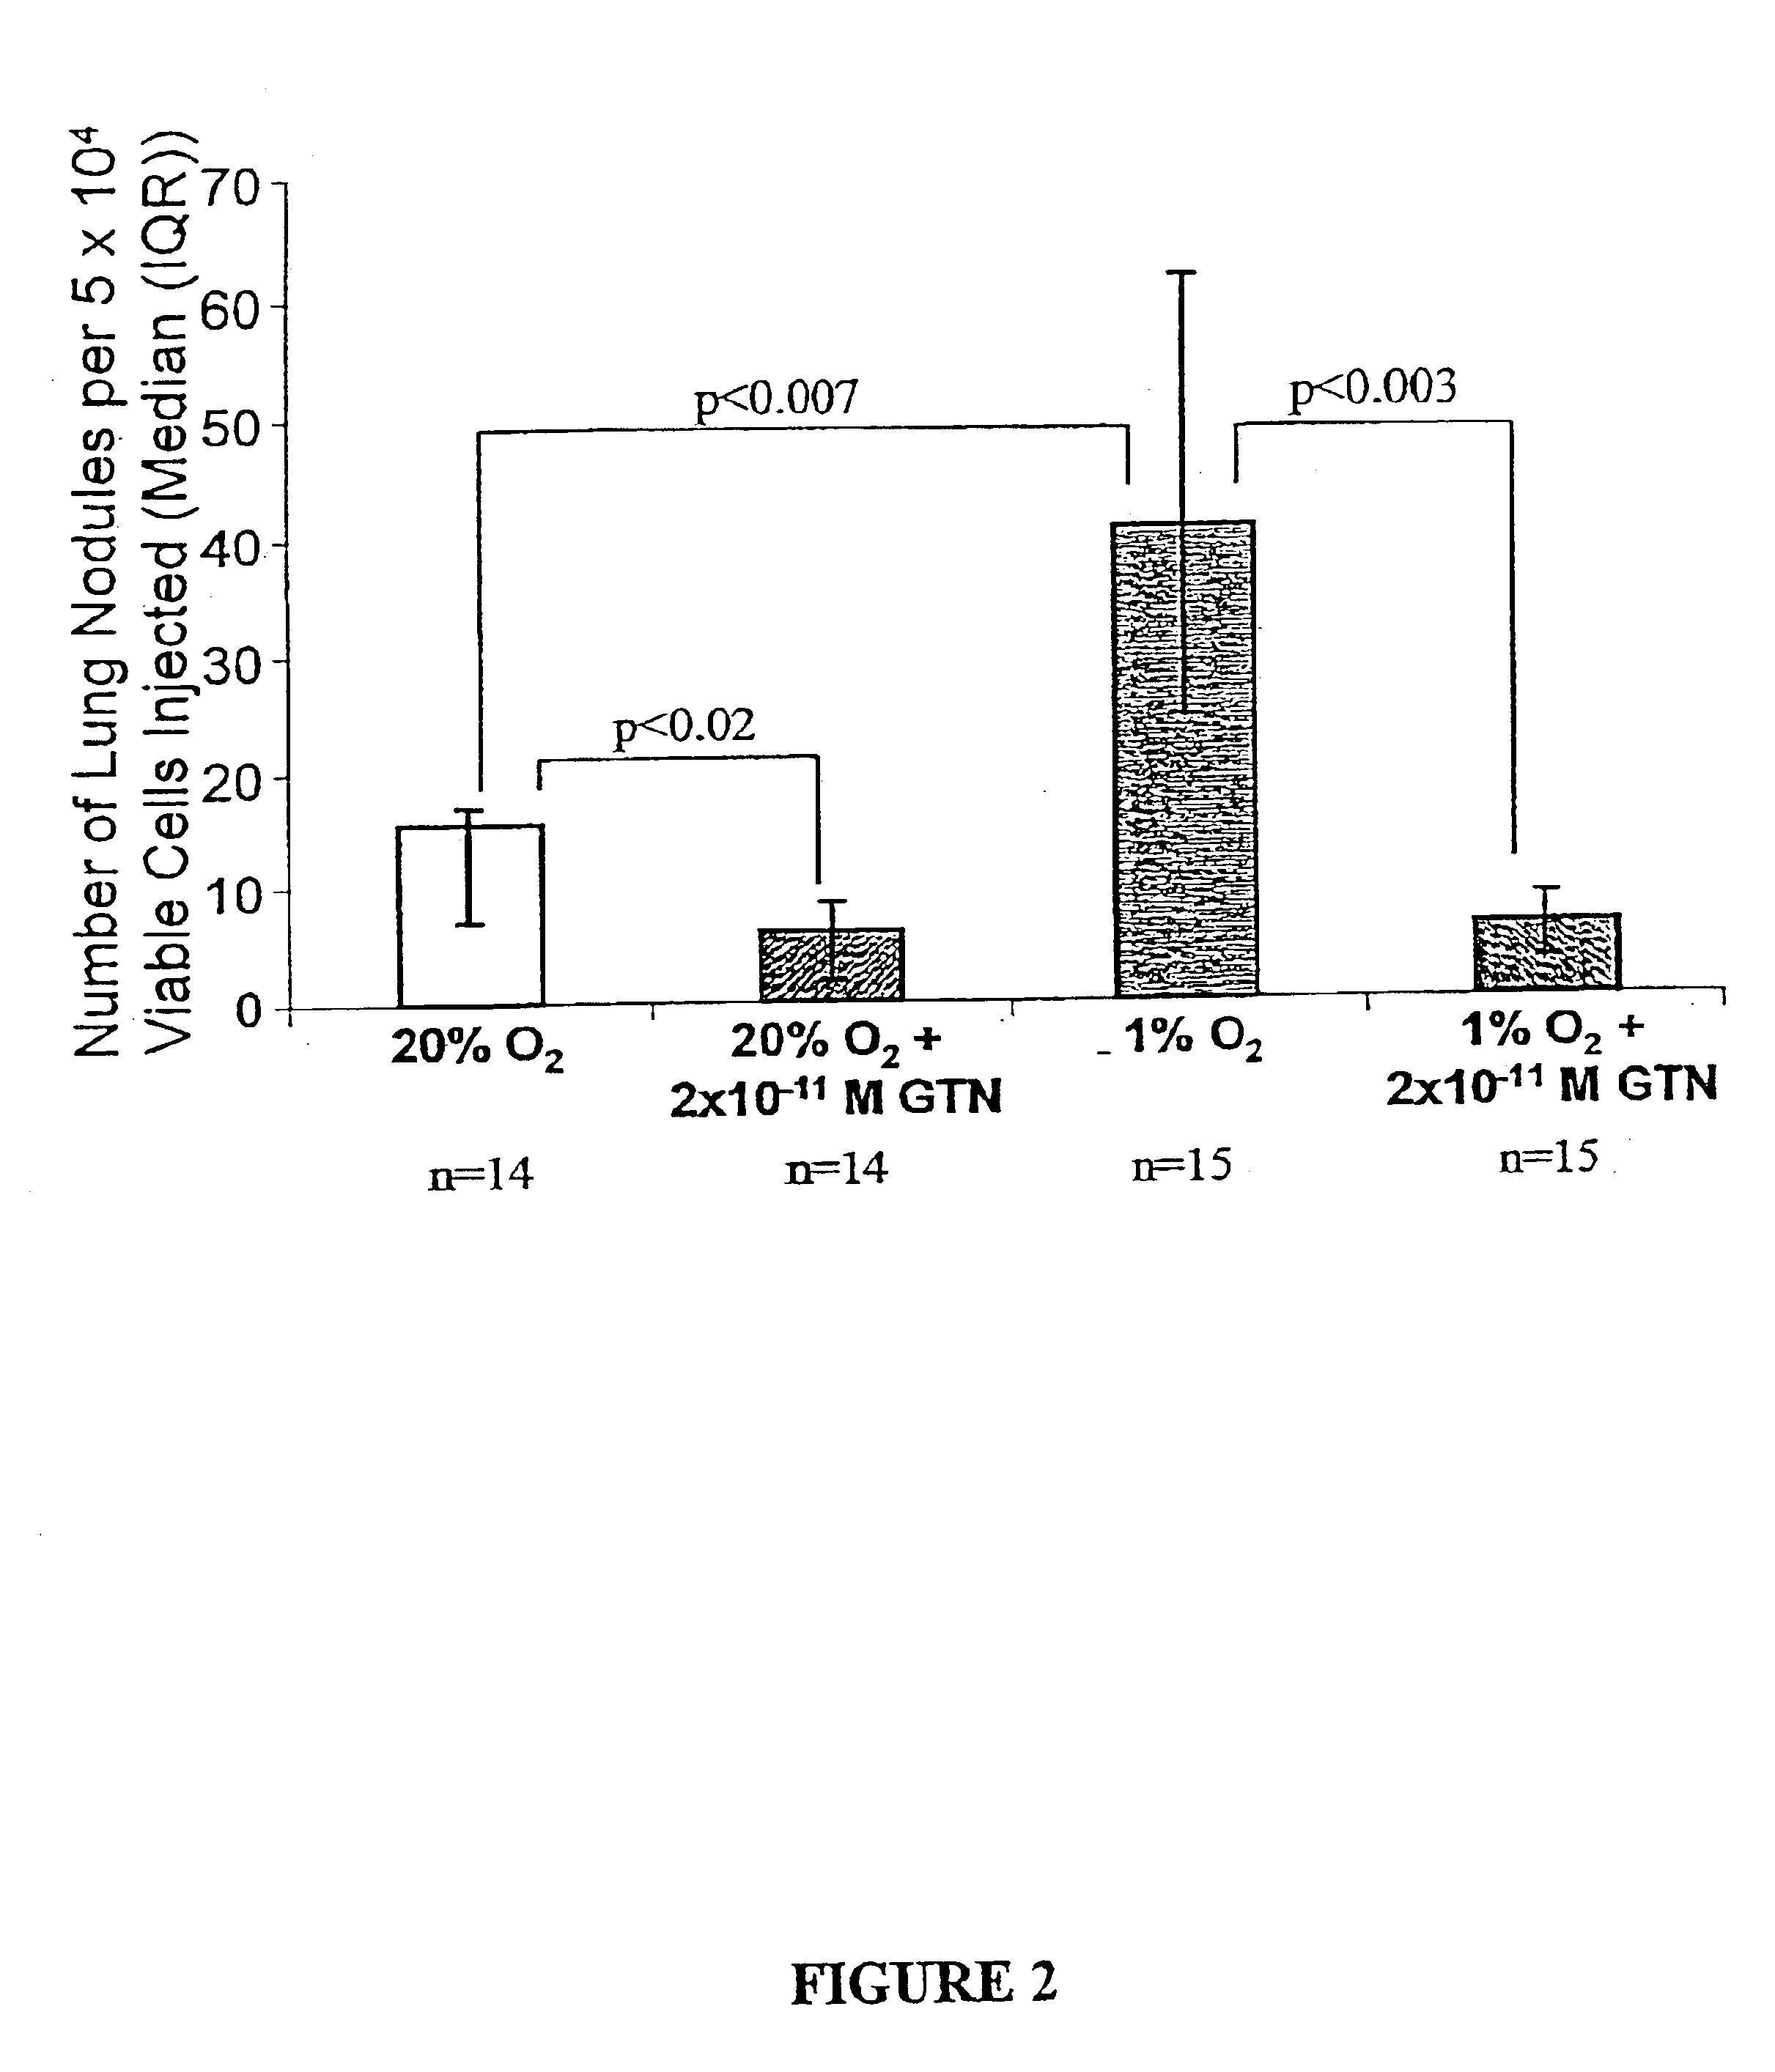 Formulations and methods of using nitric oxide mimetics against a malignant cell phenotype